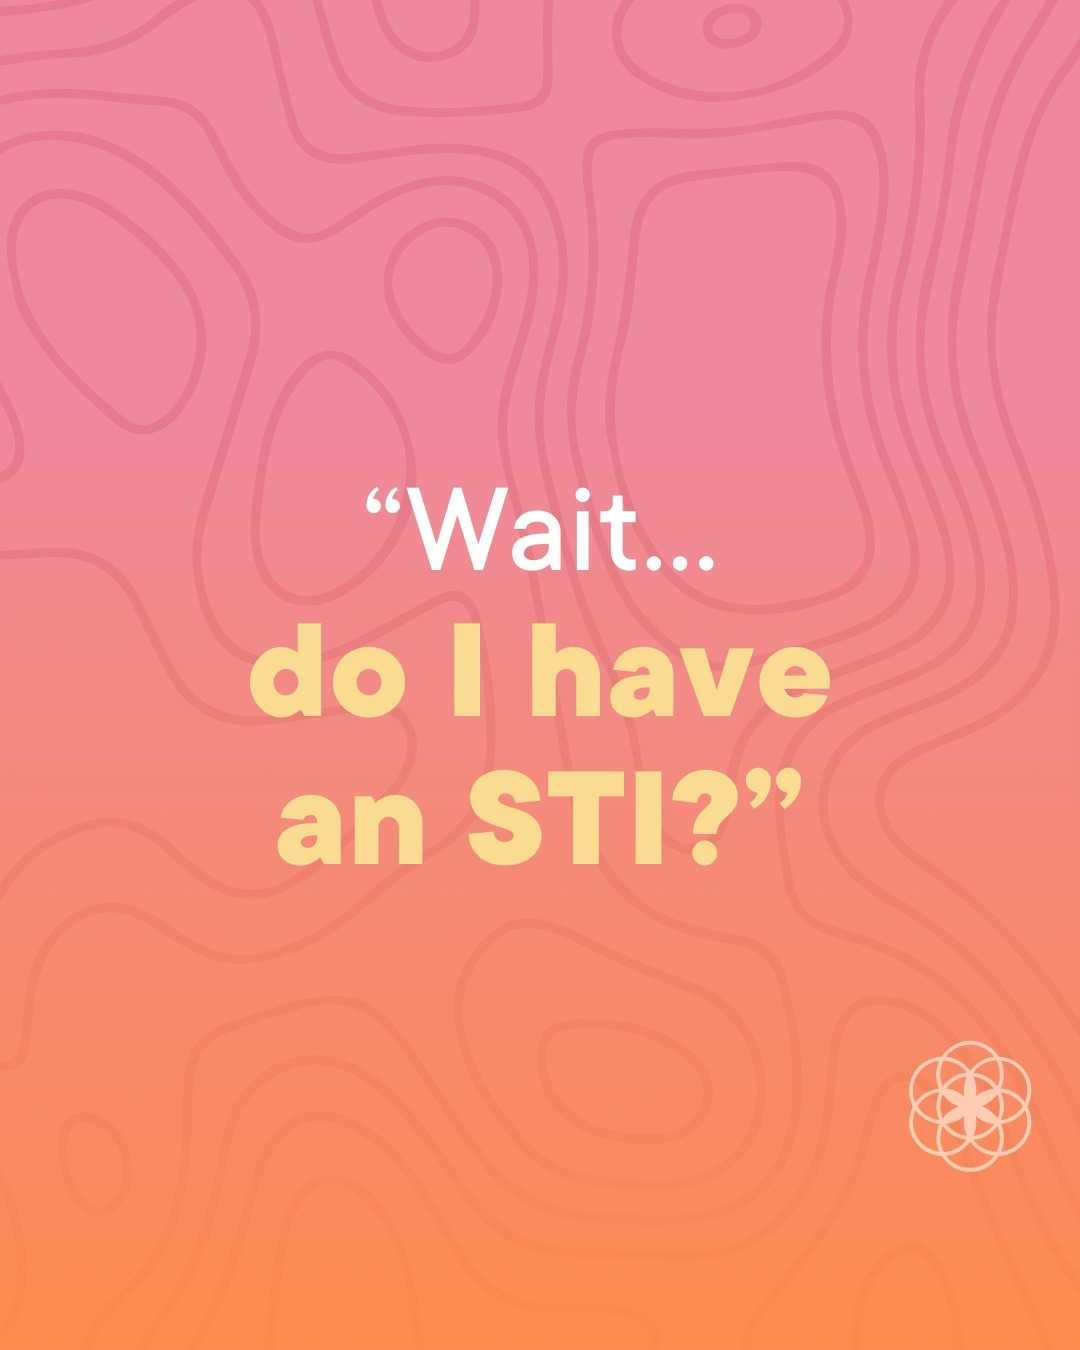 Did you know the majority of STIs have no, or only mild, symptoms and may take a while for you to recognize? ⁠
⁠
Knowing the facts about detecting STIs may change the way you take precautions around s*x in your own life and help you get tested regularly.⁠
⁠
Stay safe ✌️⁠